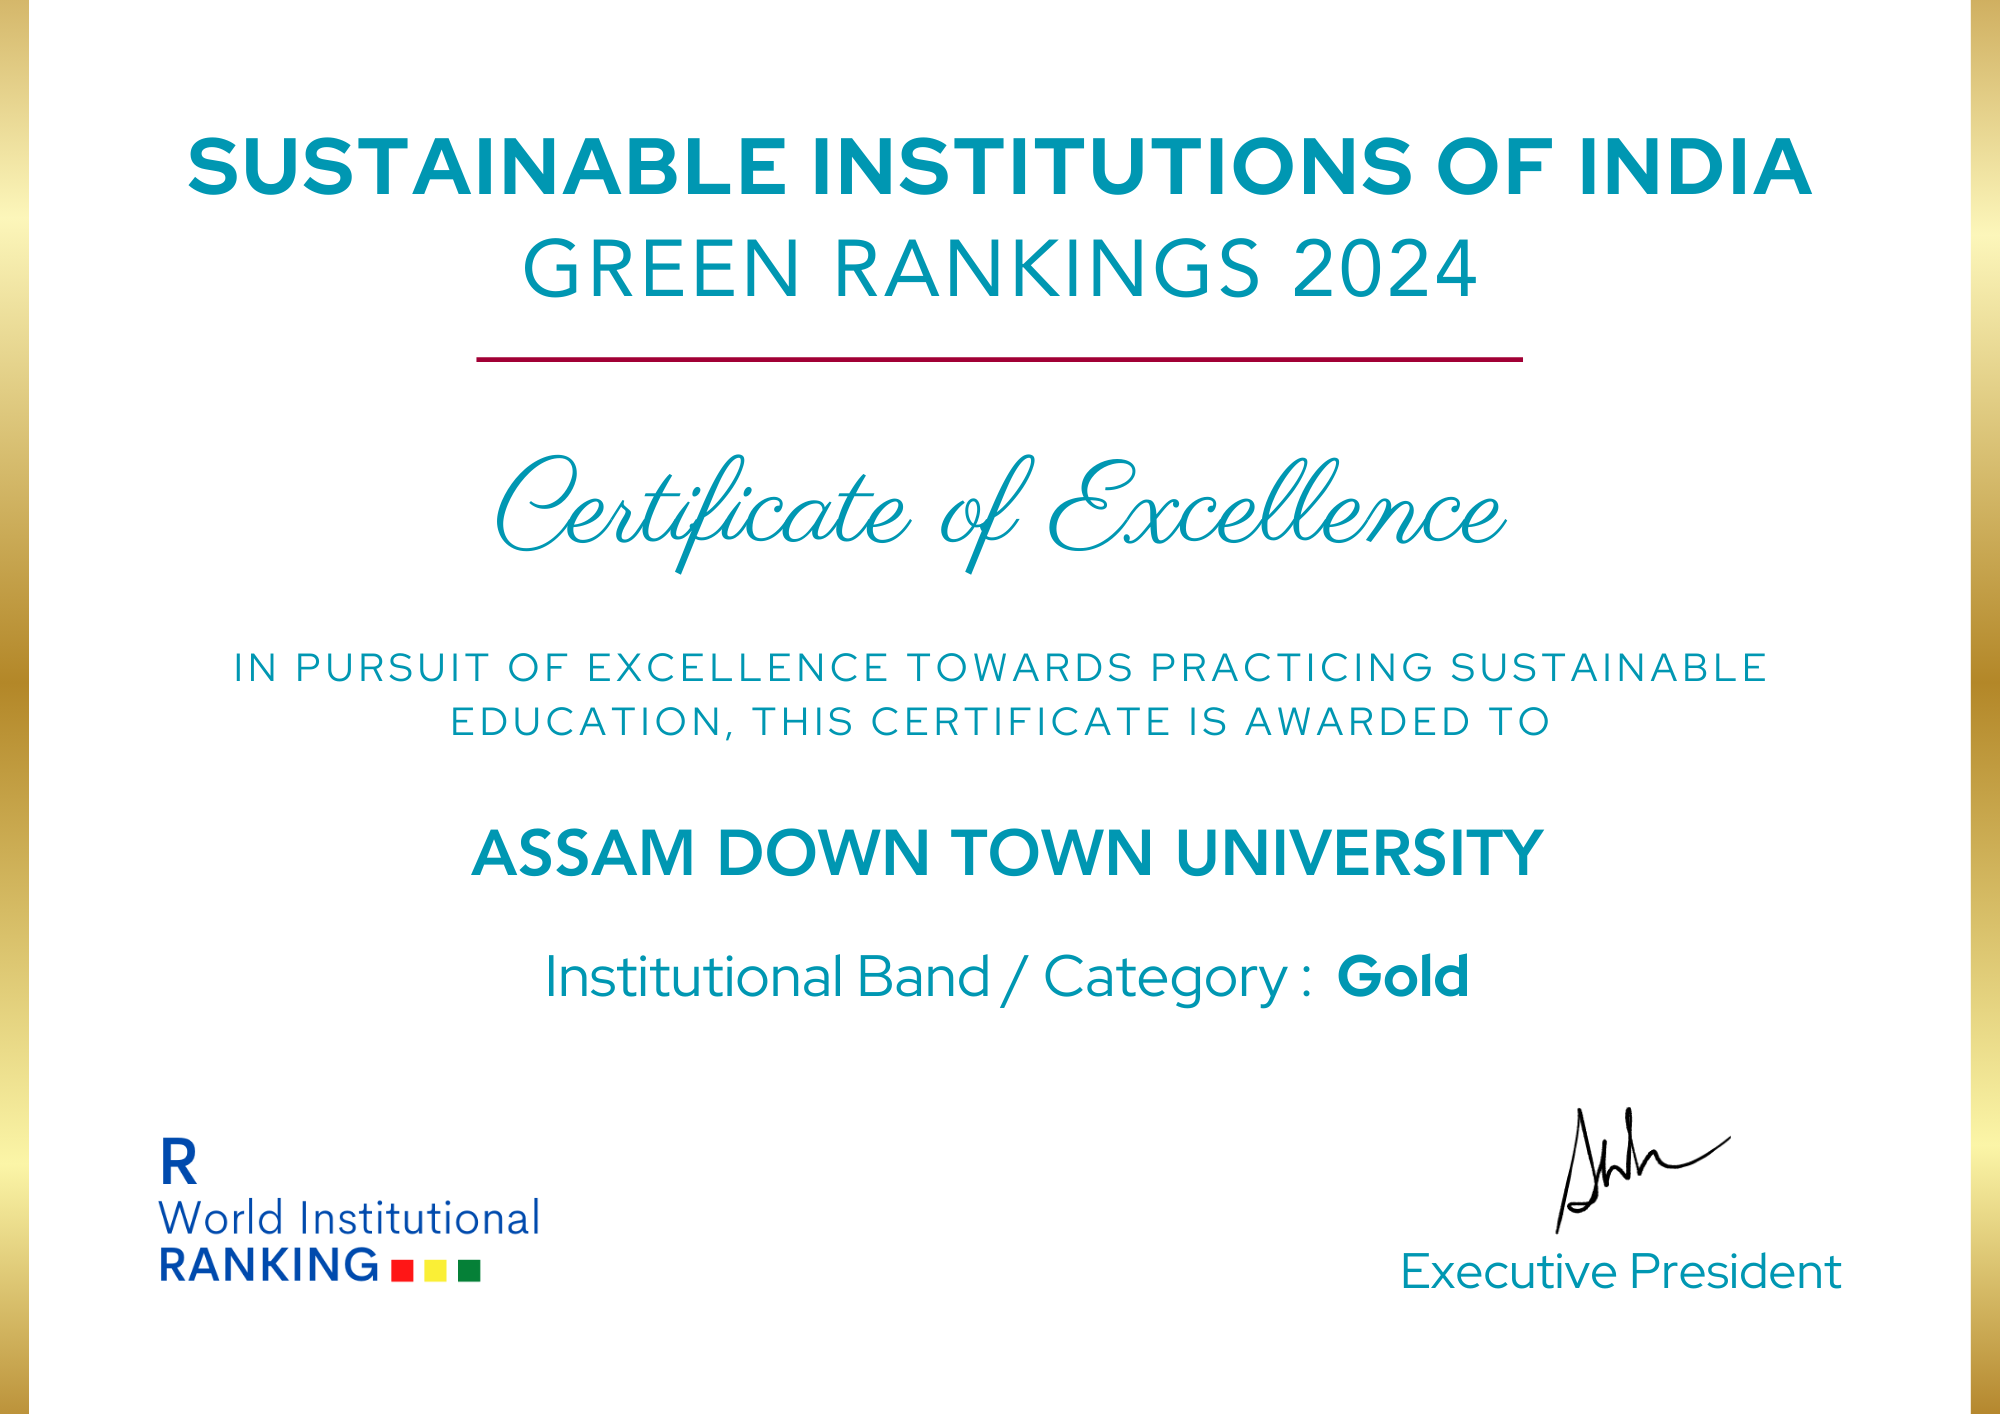 Gold in Green Rankings 2024, Assam down town Unive...